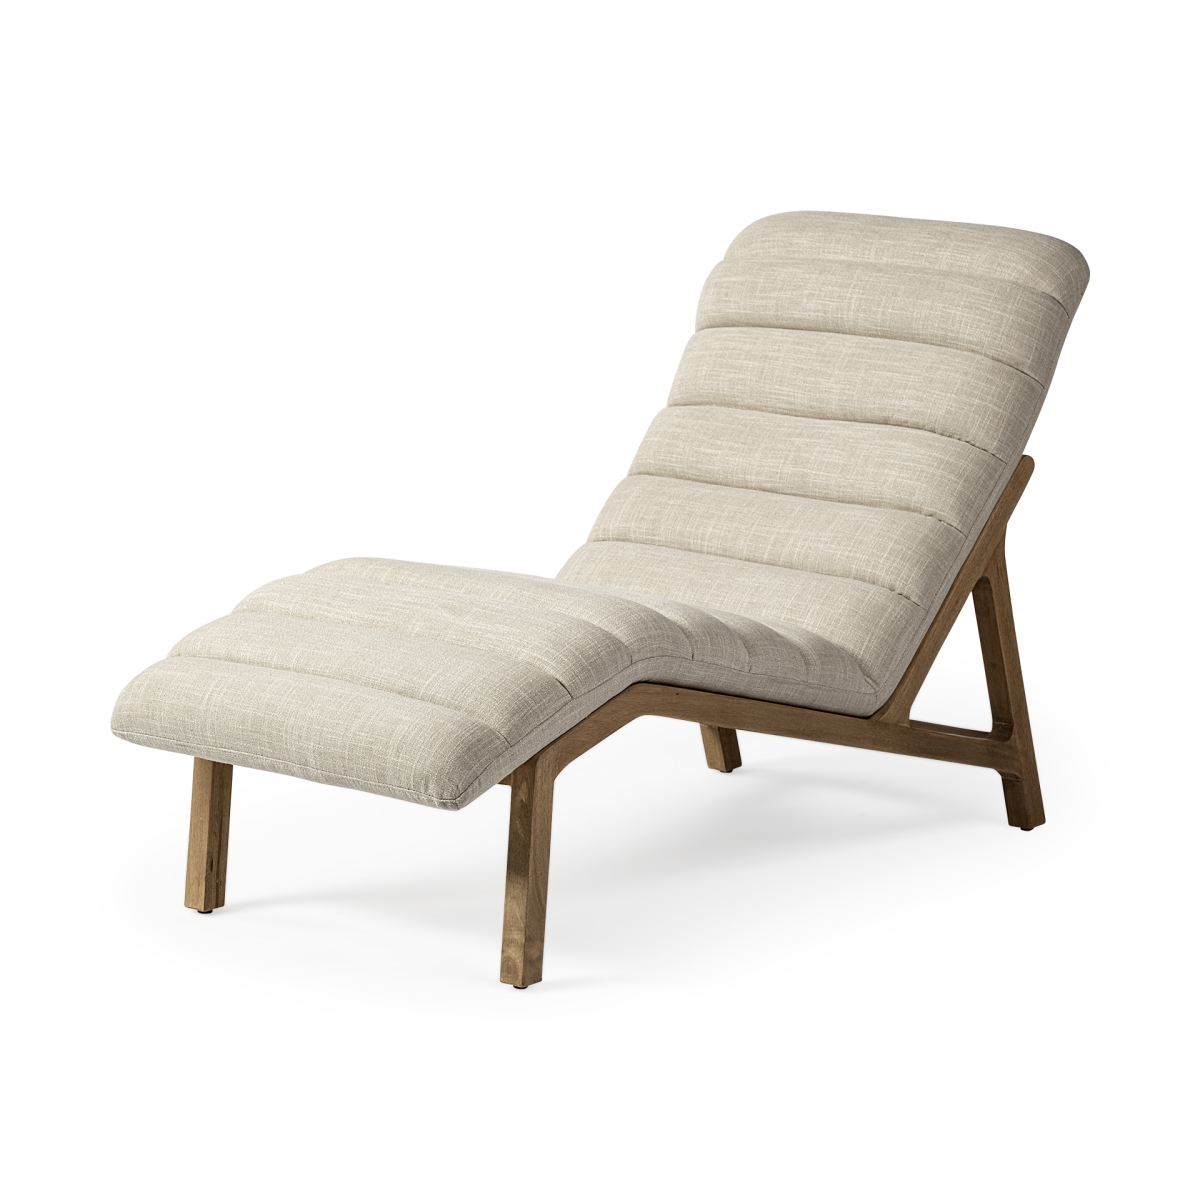 HomeRoots 380186 Modern Cream Fabric Upholstered Chaise Lounge Chair with Solid Wood Frame & Base